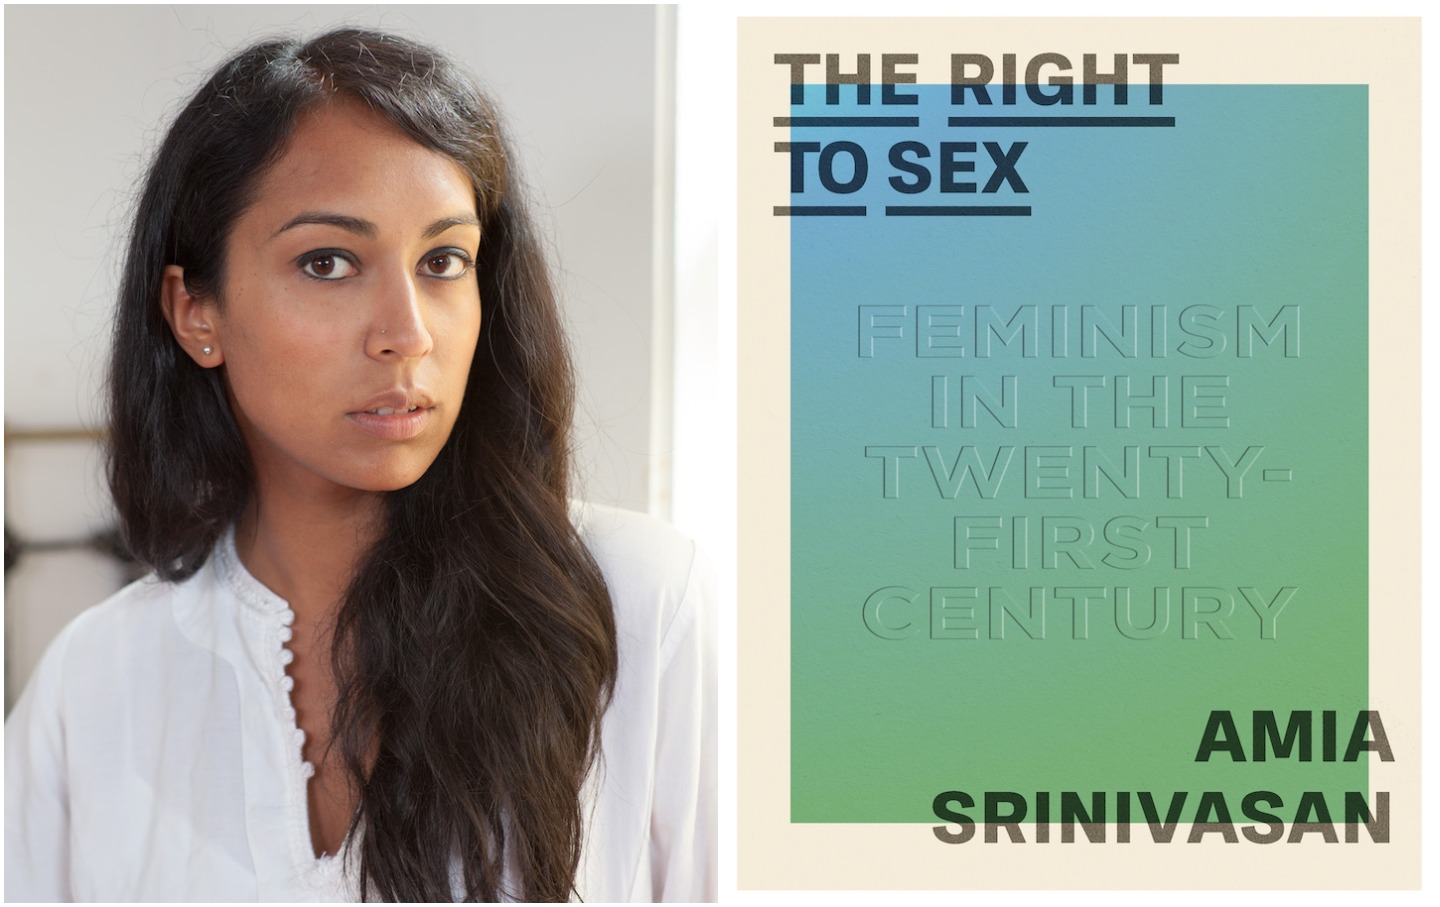 Desire in Our Times: A Conversation With Amia Srinivasan